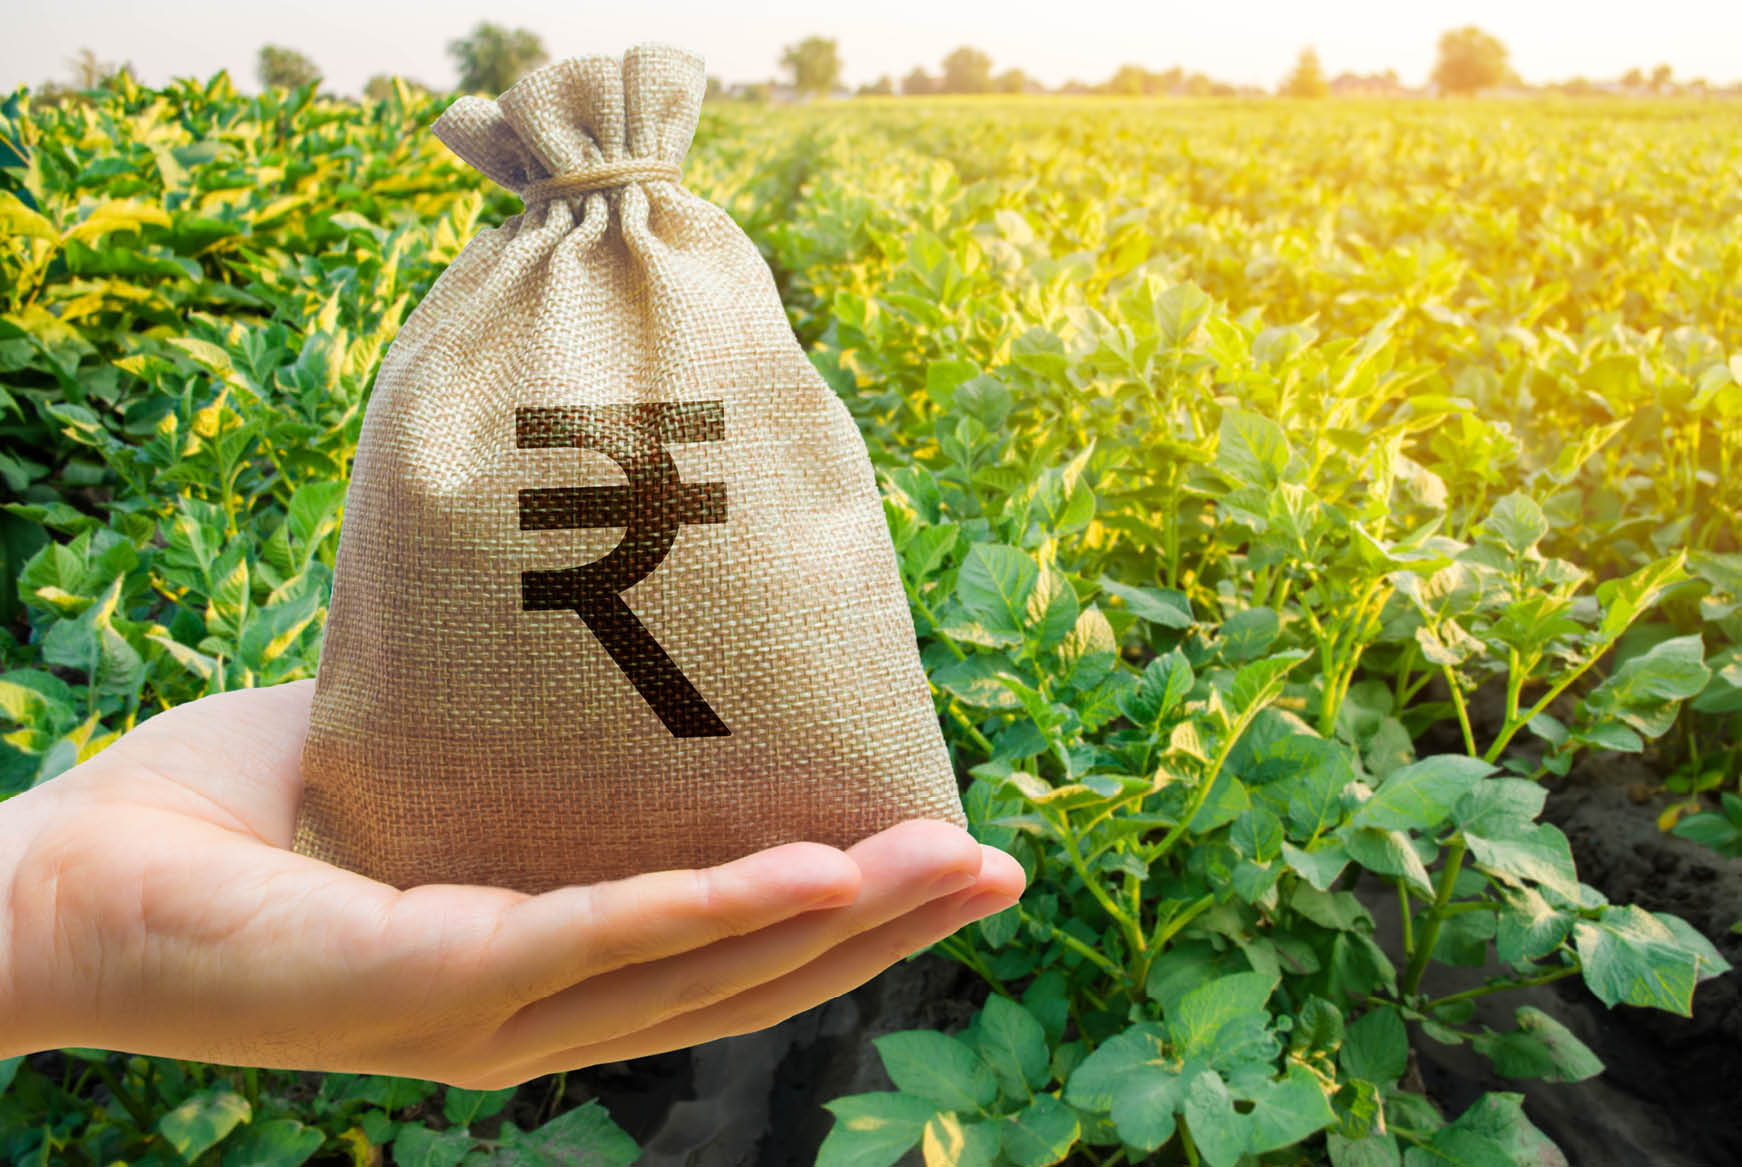 Hand holding a sack with rupee symbol in a green field